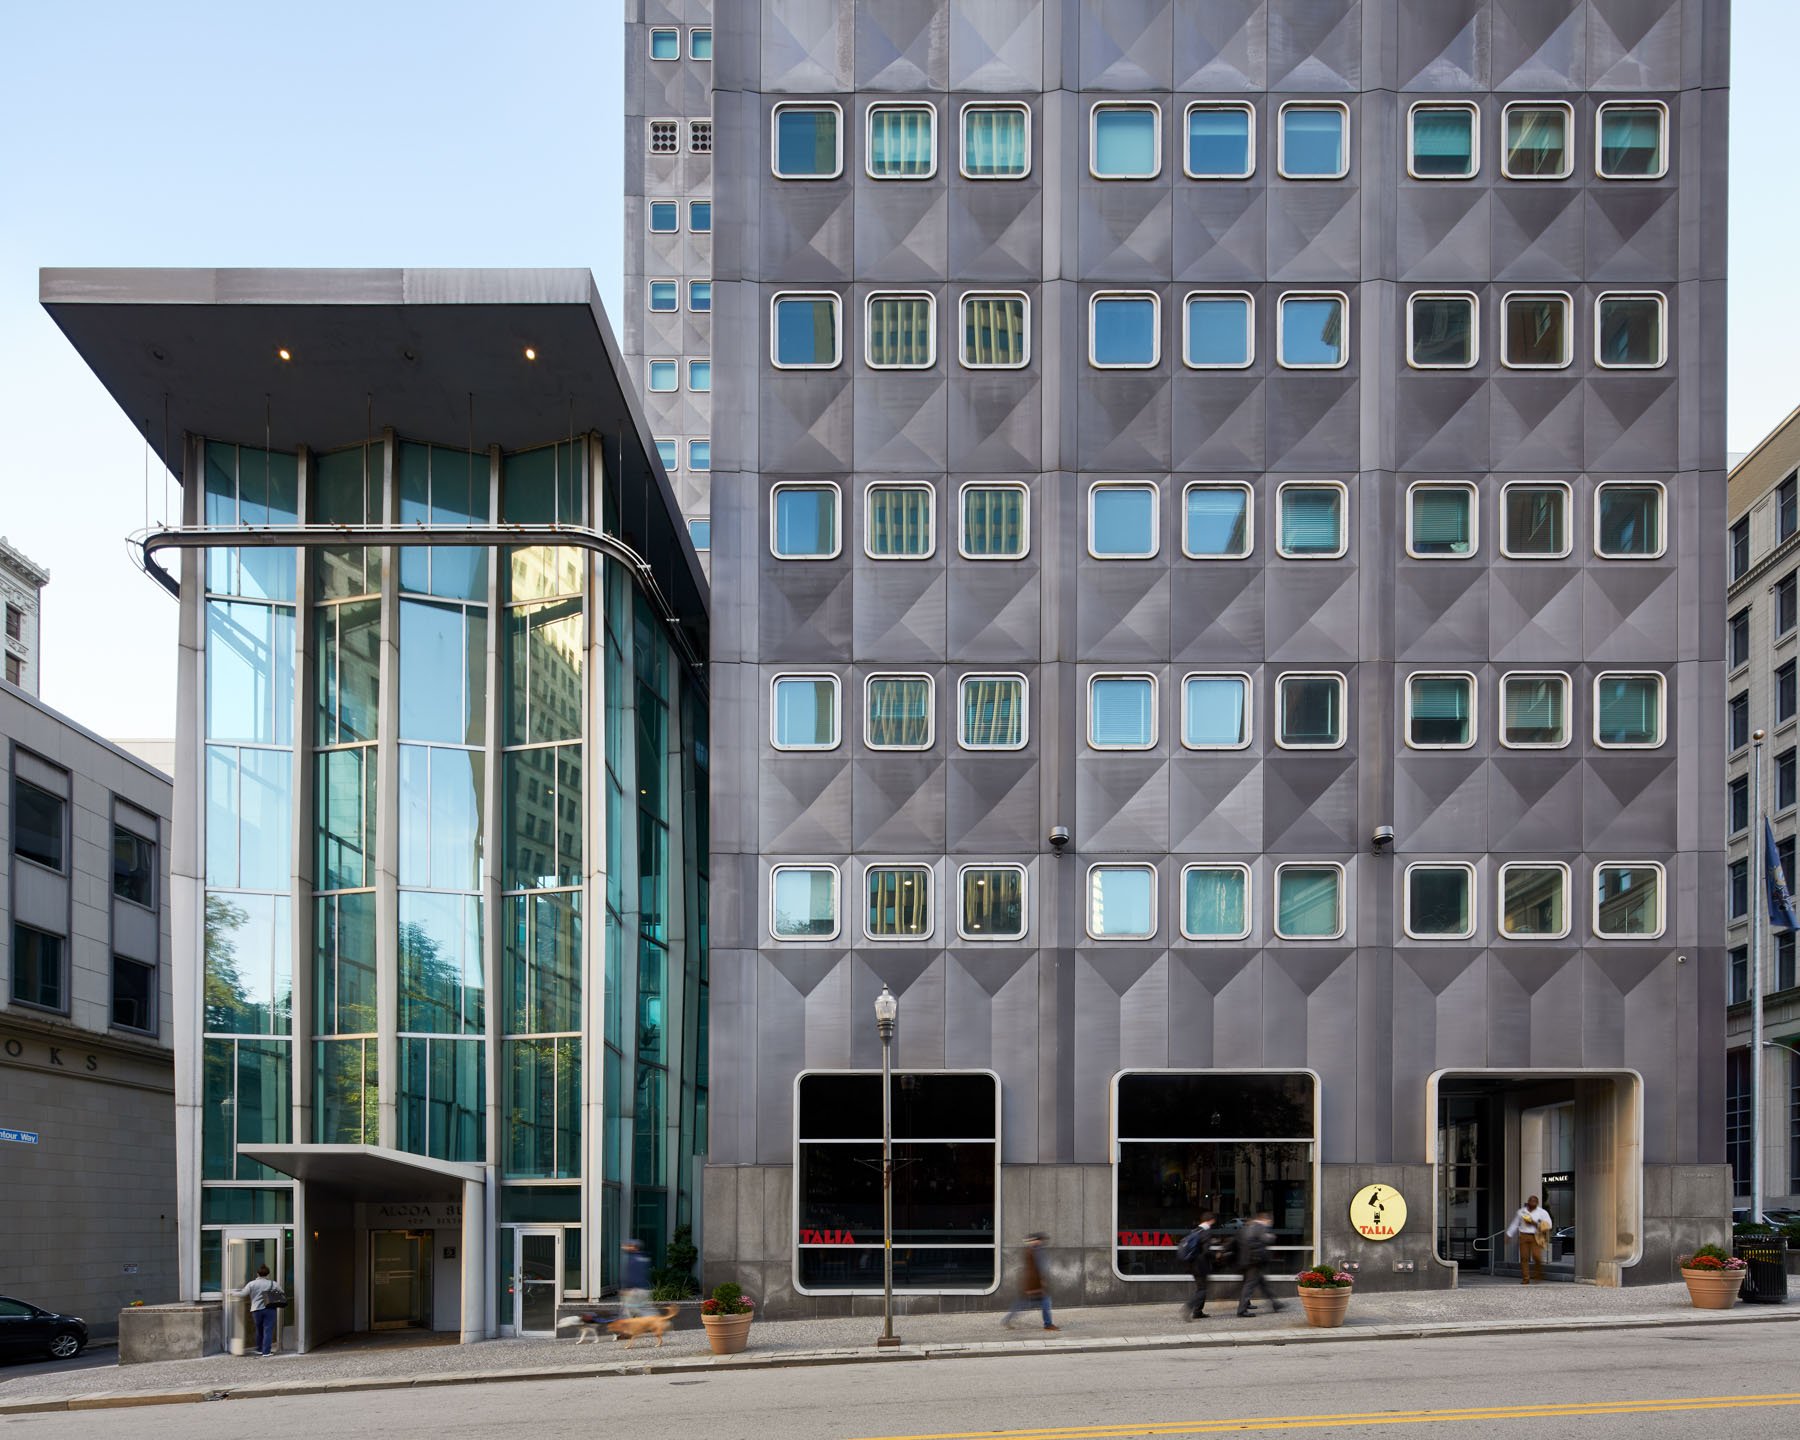   “It’s curtain wall was not constructed piece by piece but prefabricated in aluminum sheets that contained both windows and the floor zone. The windows swing open in special rubber gaskets, so the building's exterior requires minimal cleaning and ma